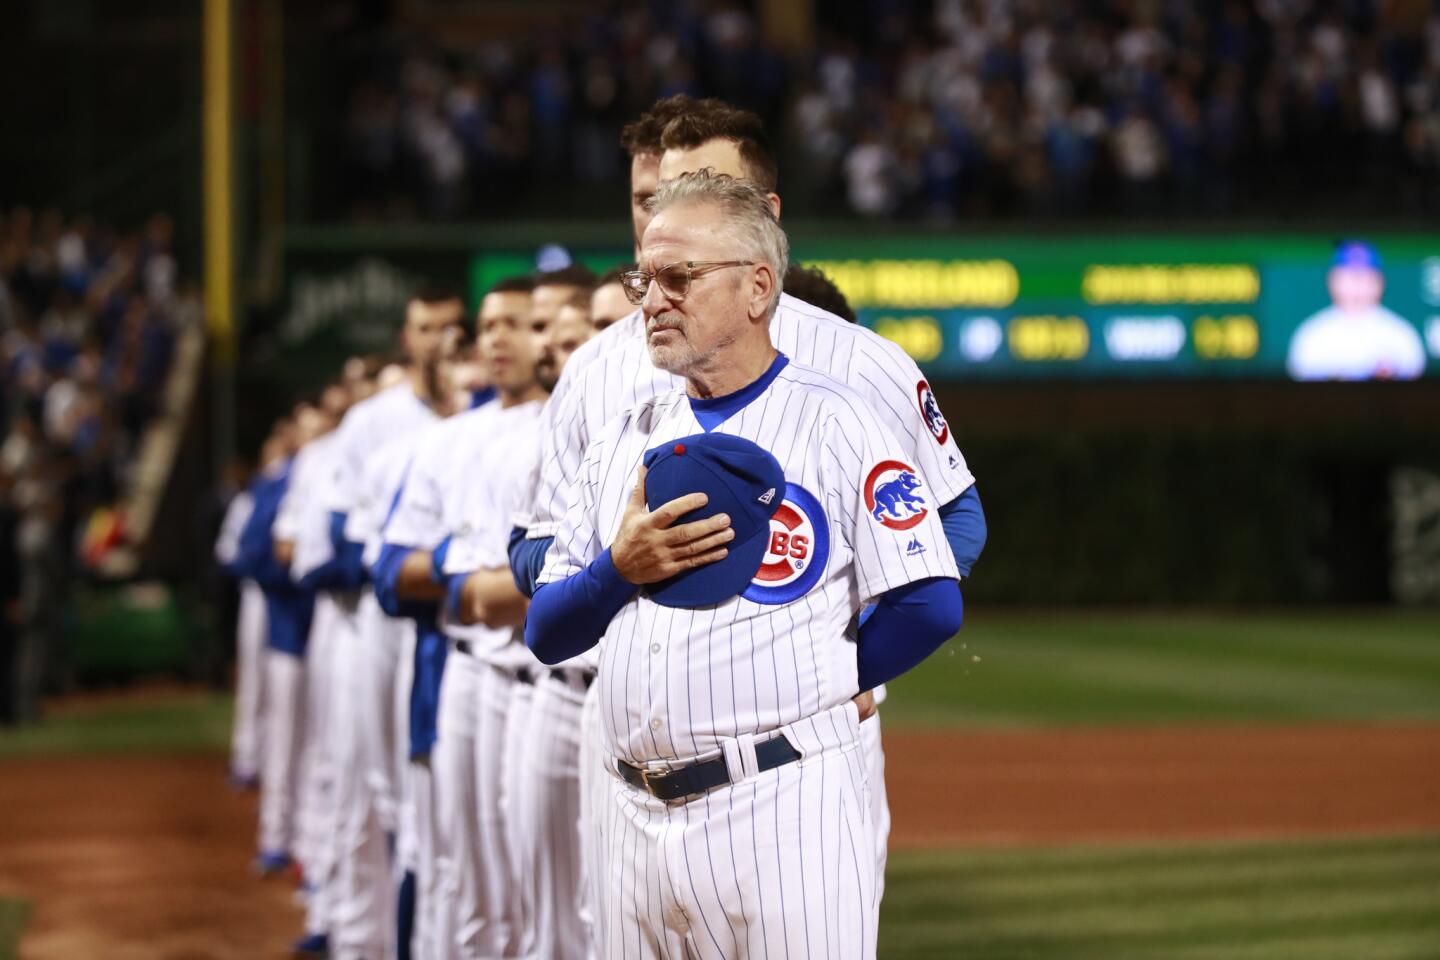 Cubs manager Joe Maddon and his team stand for the national anthem before the National League wild-card game Tuesday, Oct. 2, 2018, at Wrigley Field.